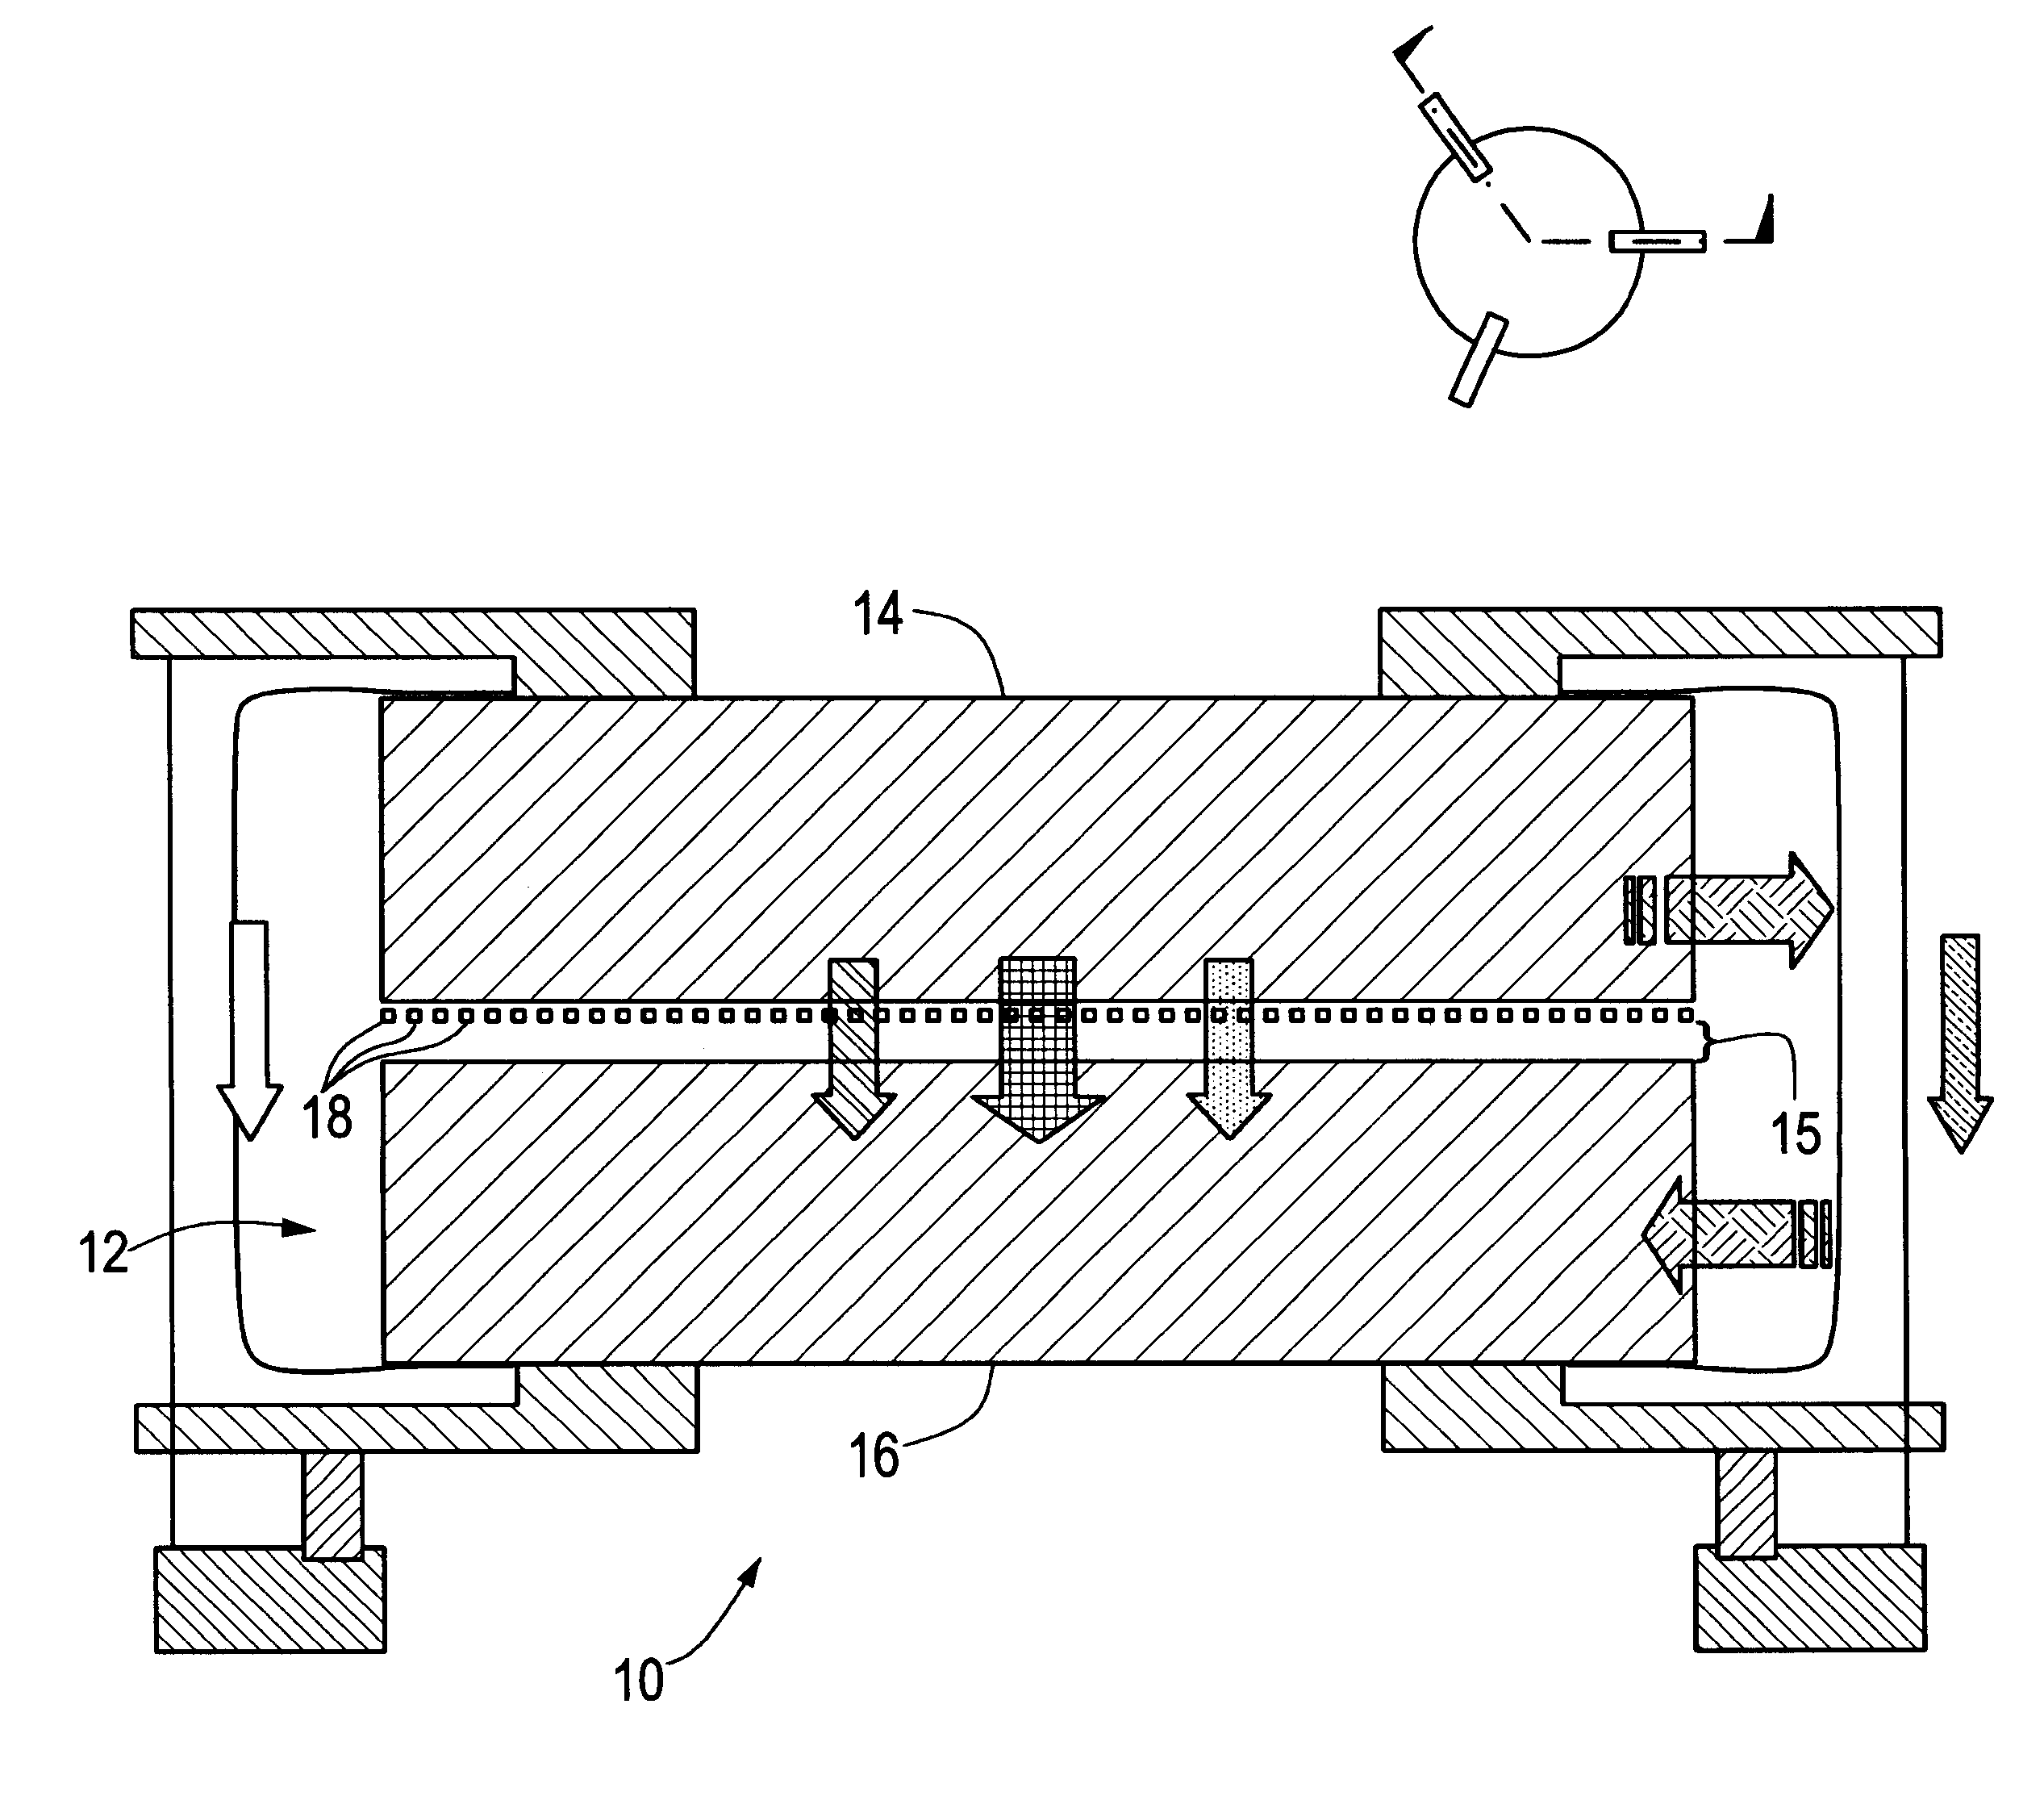 Microcavity apparatus and systems for maintaining a microcavity over a macroscale area